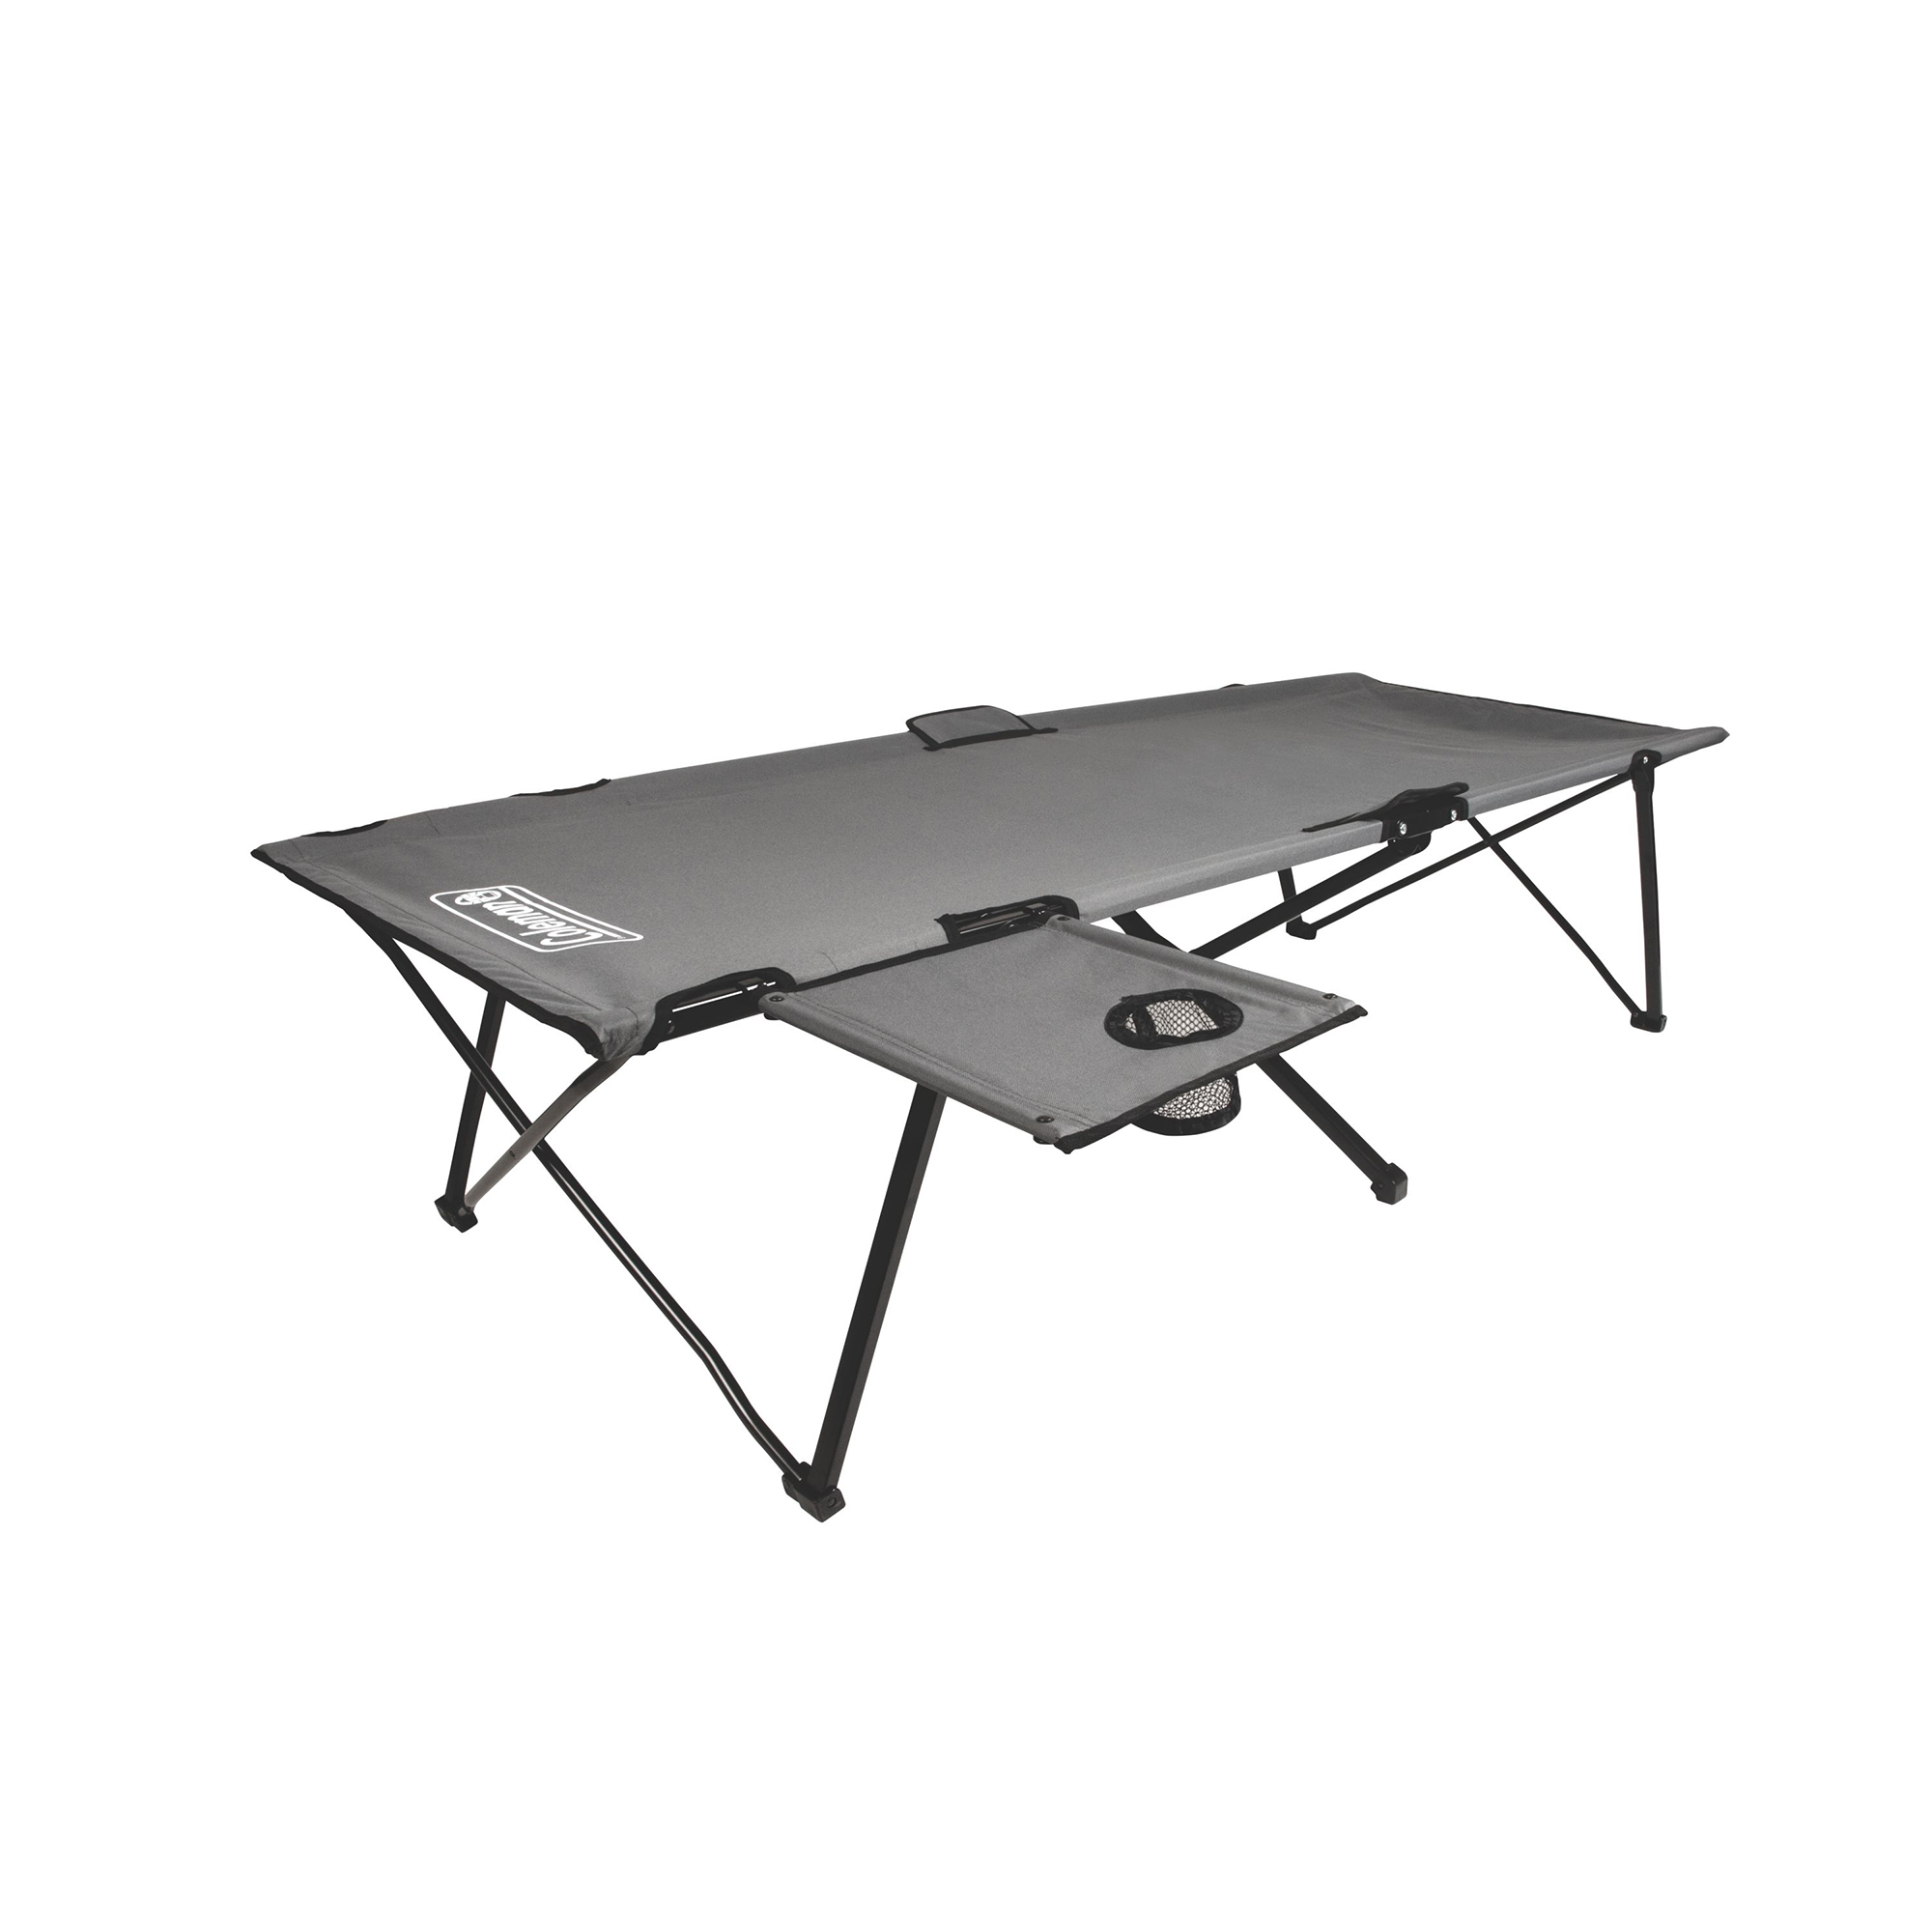 Coleman® Pack-Away® Camping Cot with Side Table - image 1 of 2